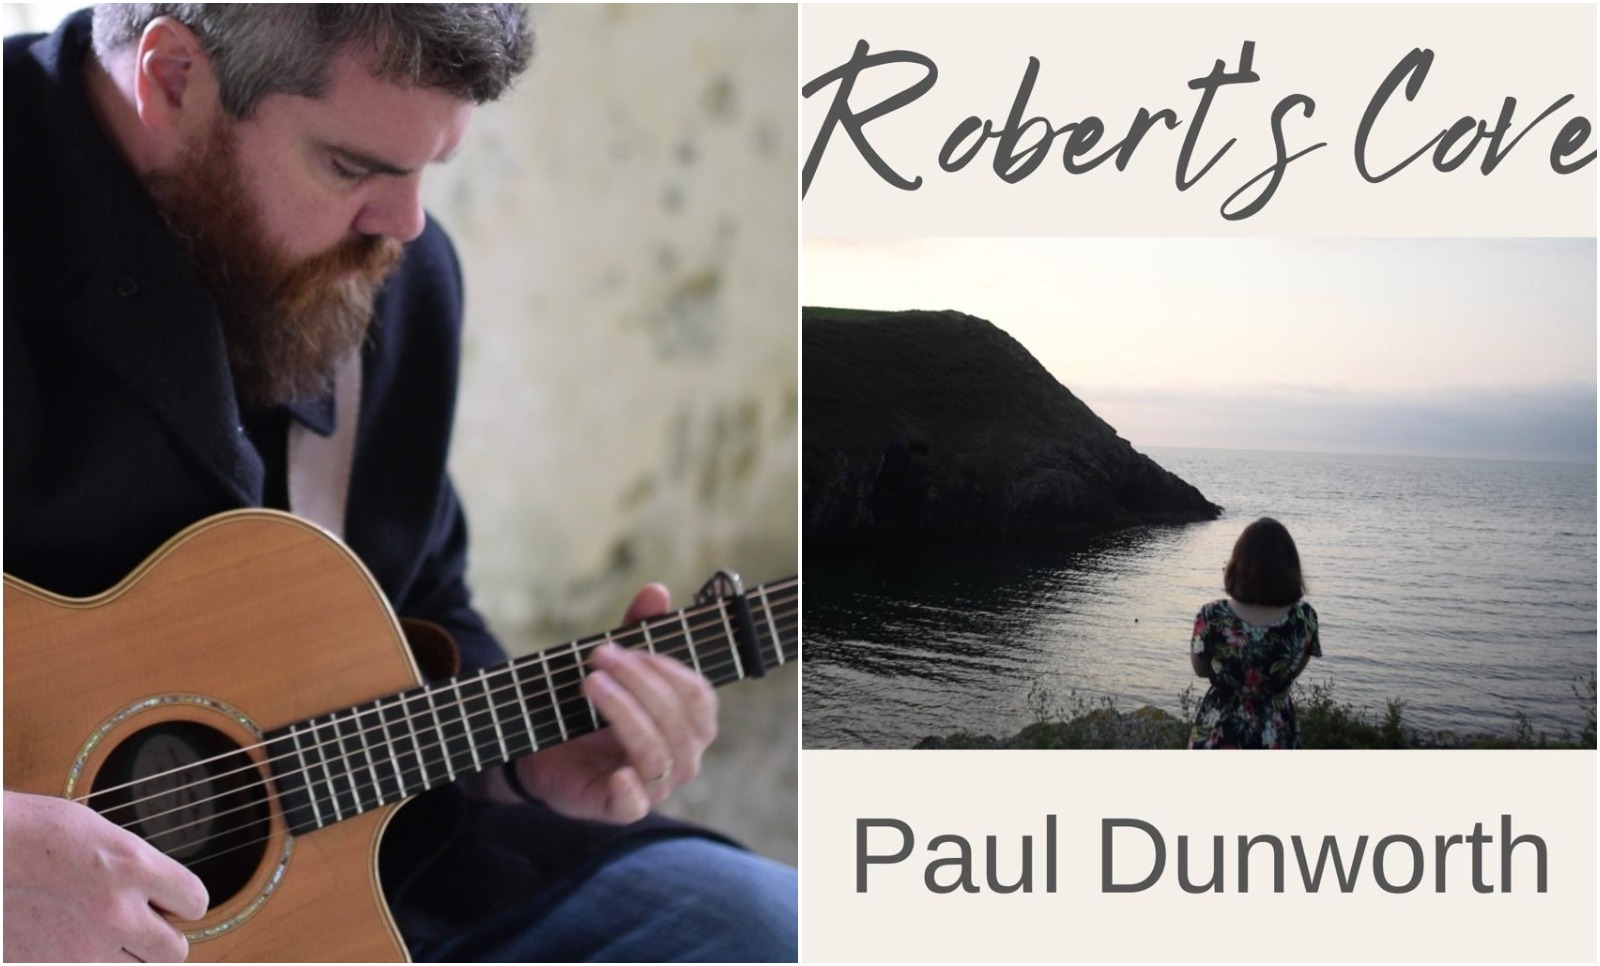 New Paul Dunworth single ‘Robert’s Cove’ is out now